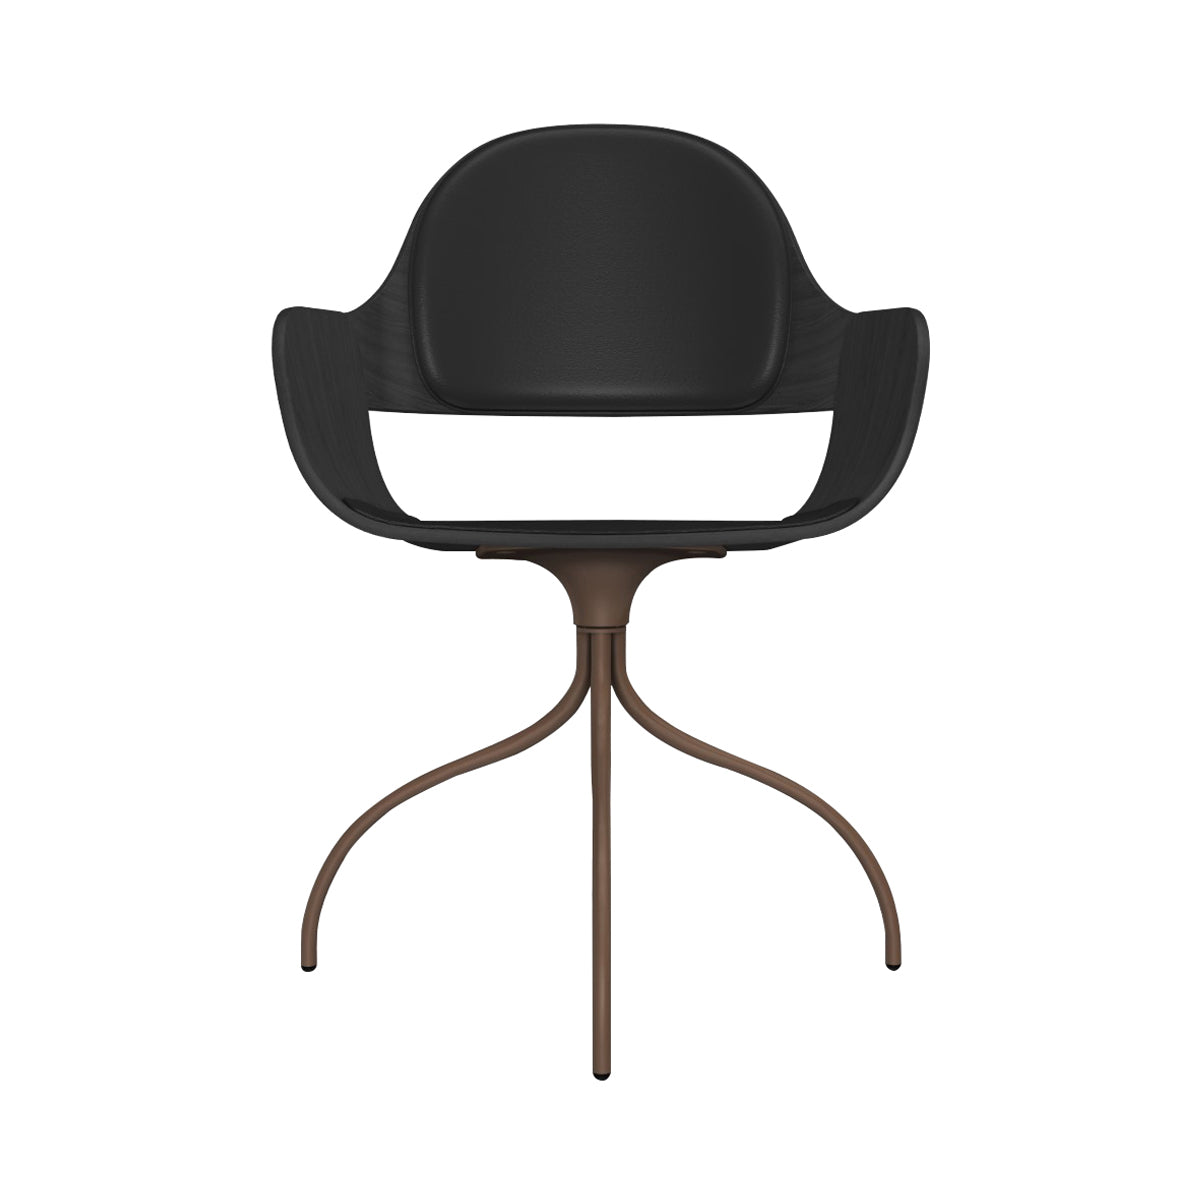 Showtime Nude Chair with Swivel Base: Seat + Backrest Cushion + Ash Stained Black + Pale Brown